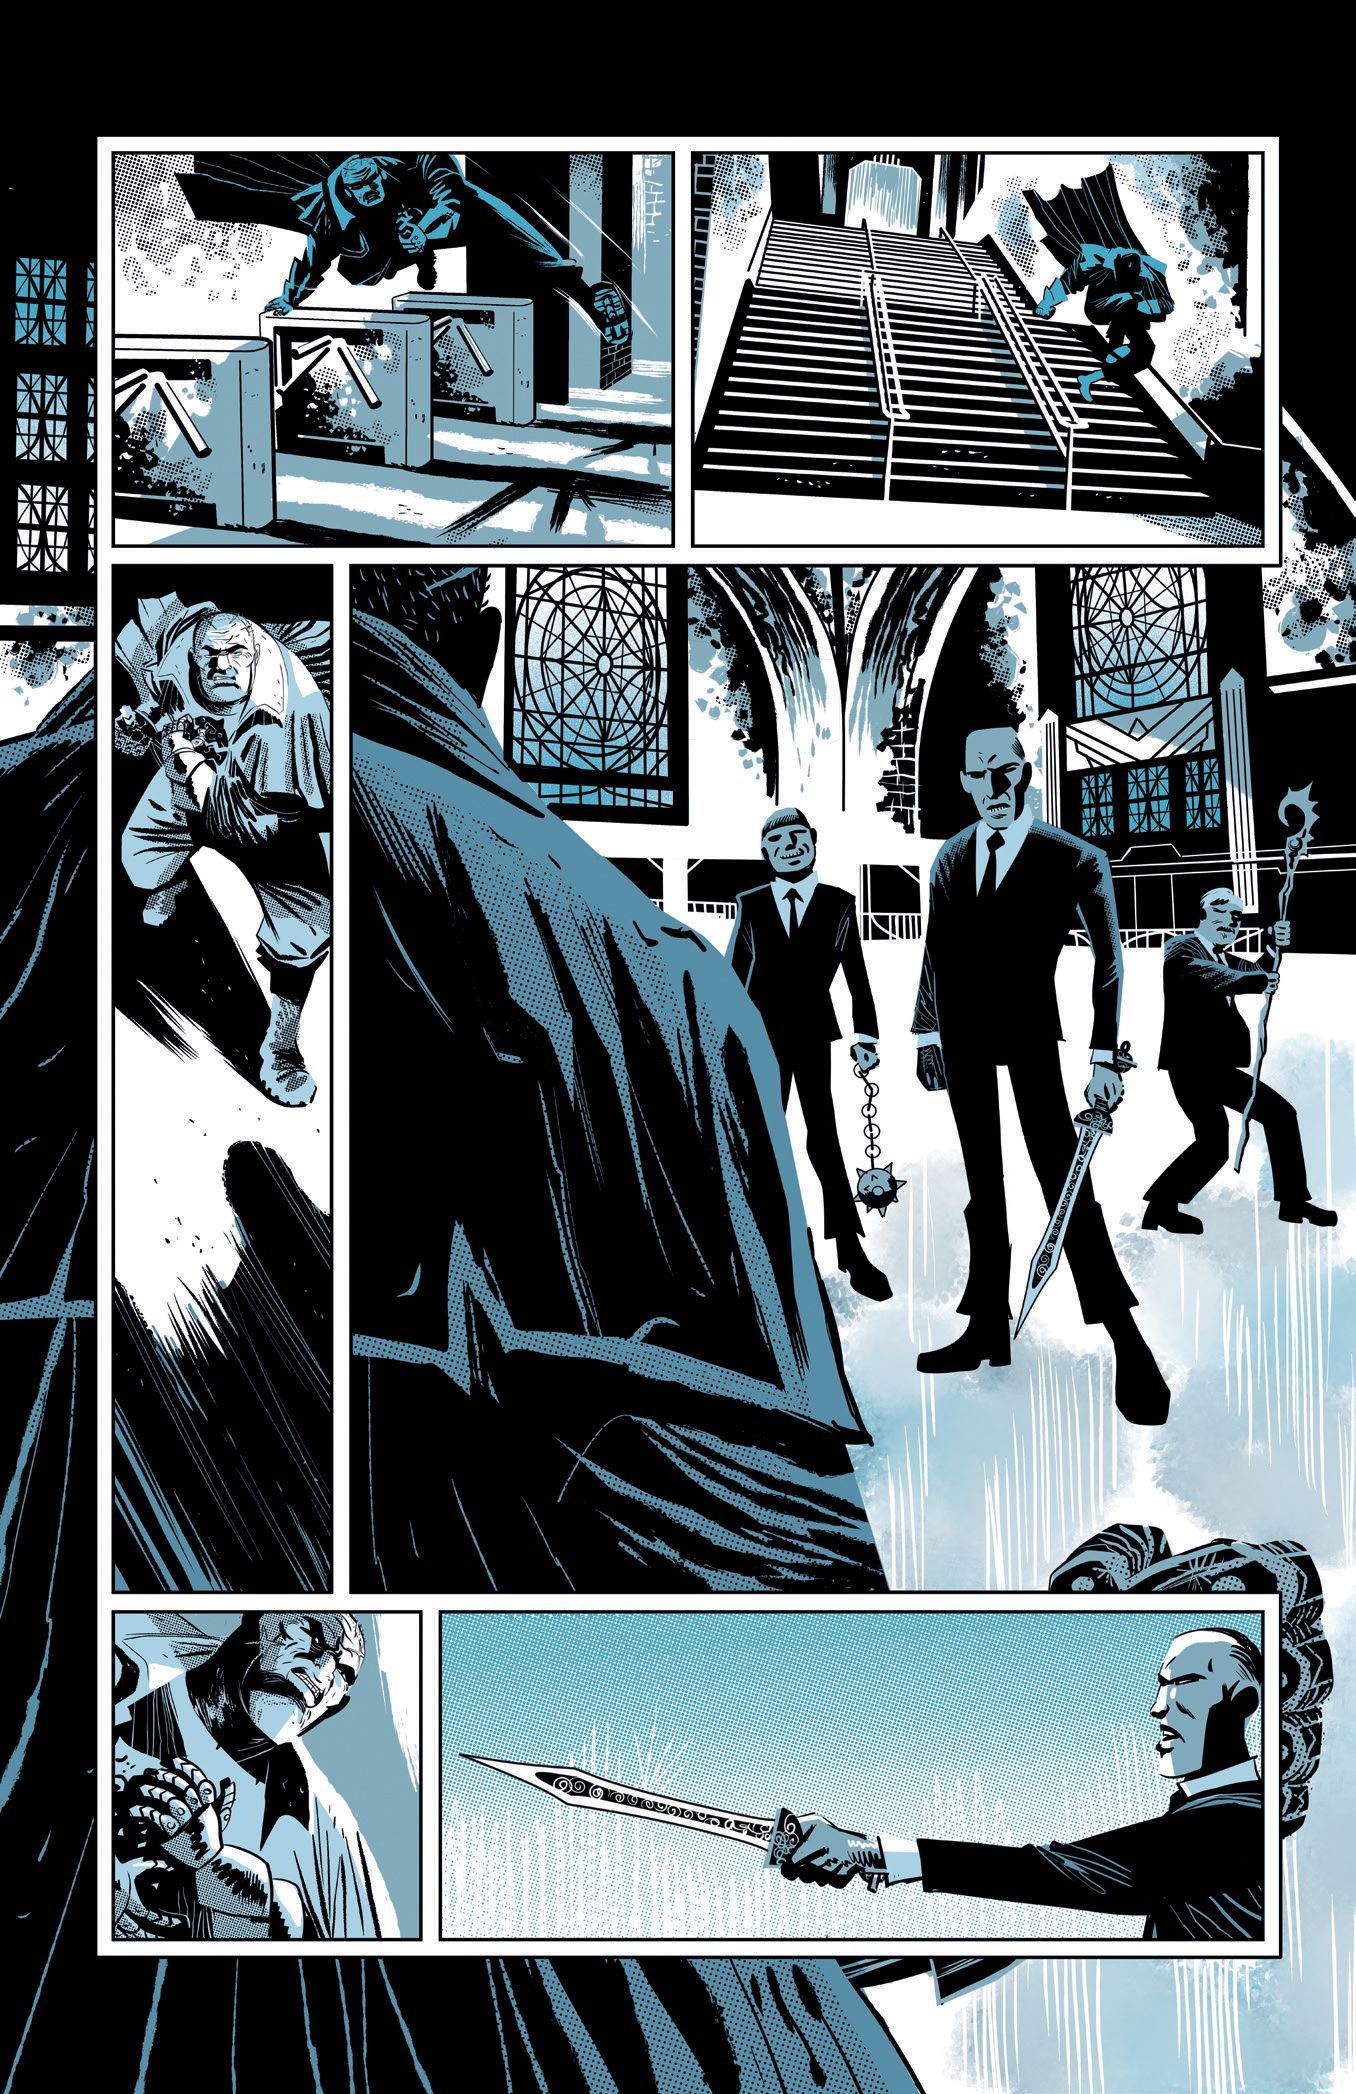 A page from Dark Horse's Elixir, a graphic novel written by Frank Barbiere and Ricky Mammone, drawn by Victor Santos.